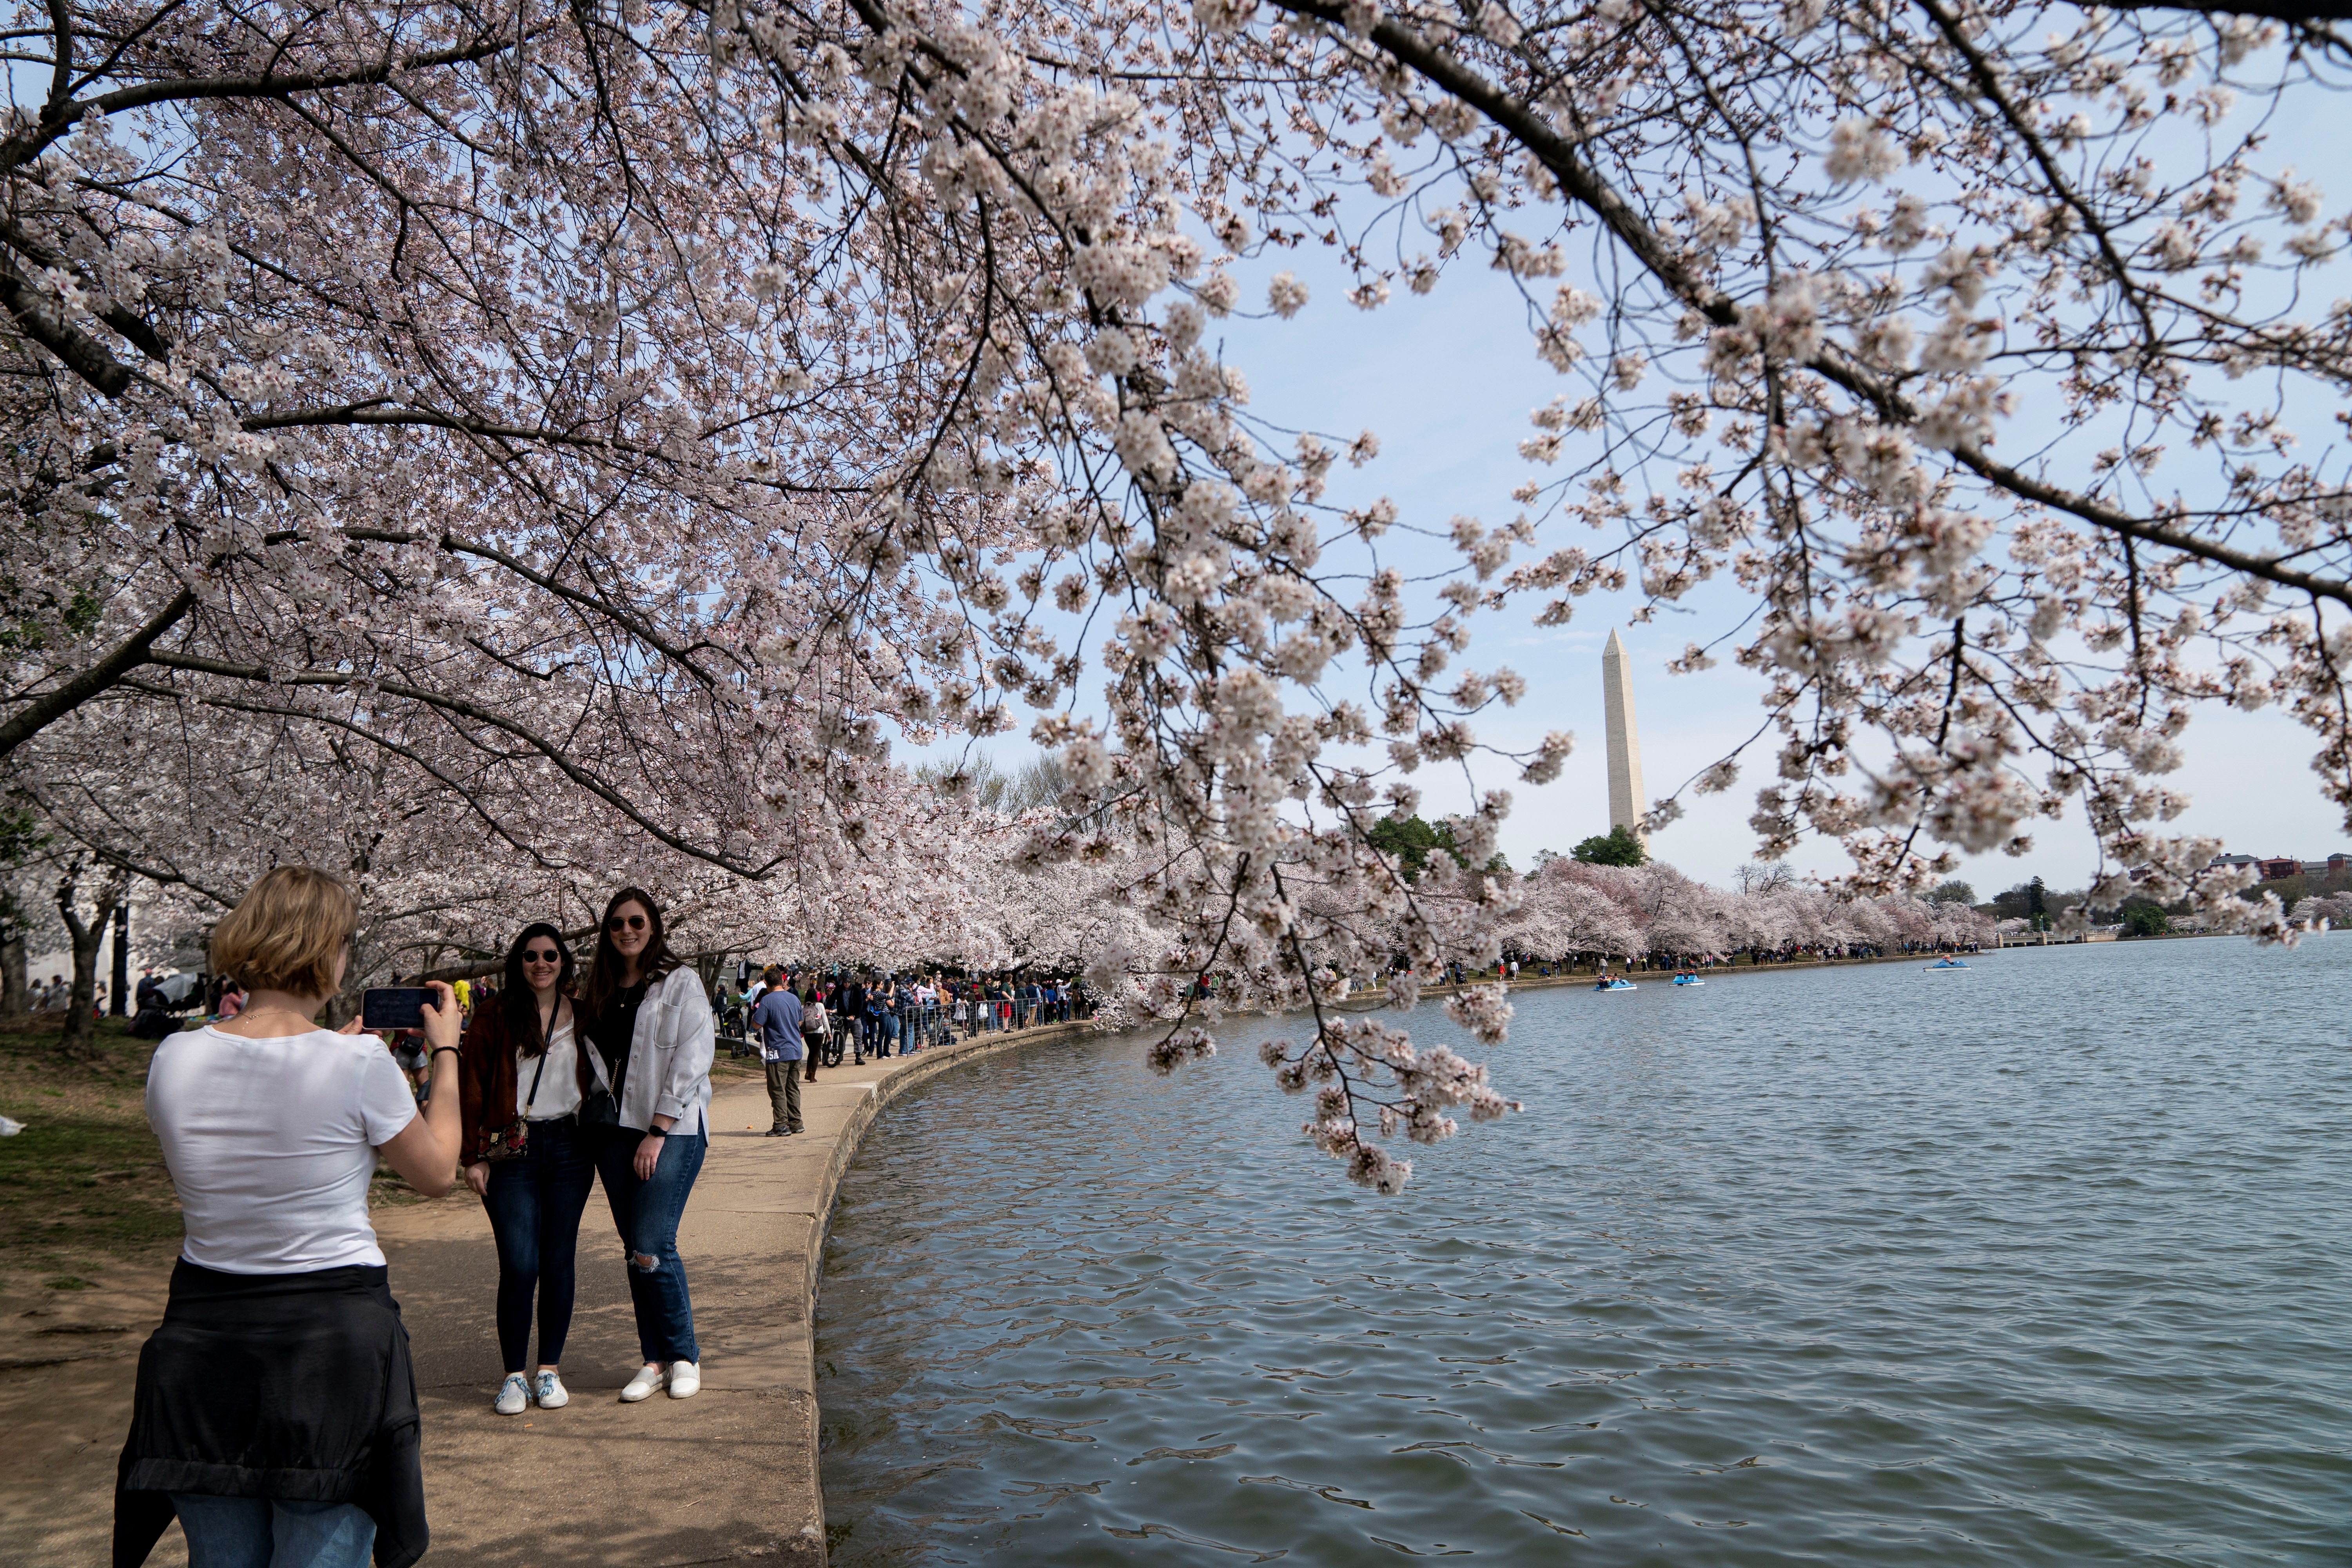 Why Go To D.C.? The Most Stunning Cherry Blossoms Are Right In NJ